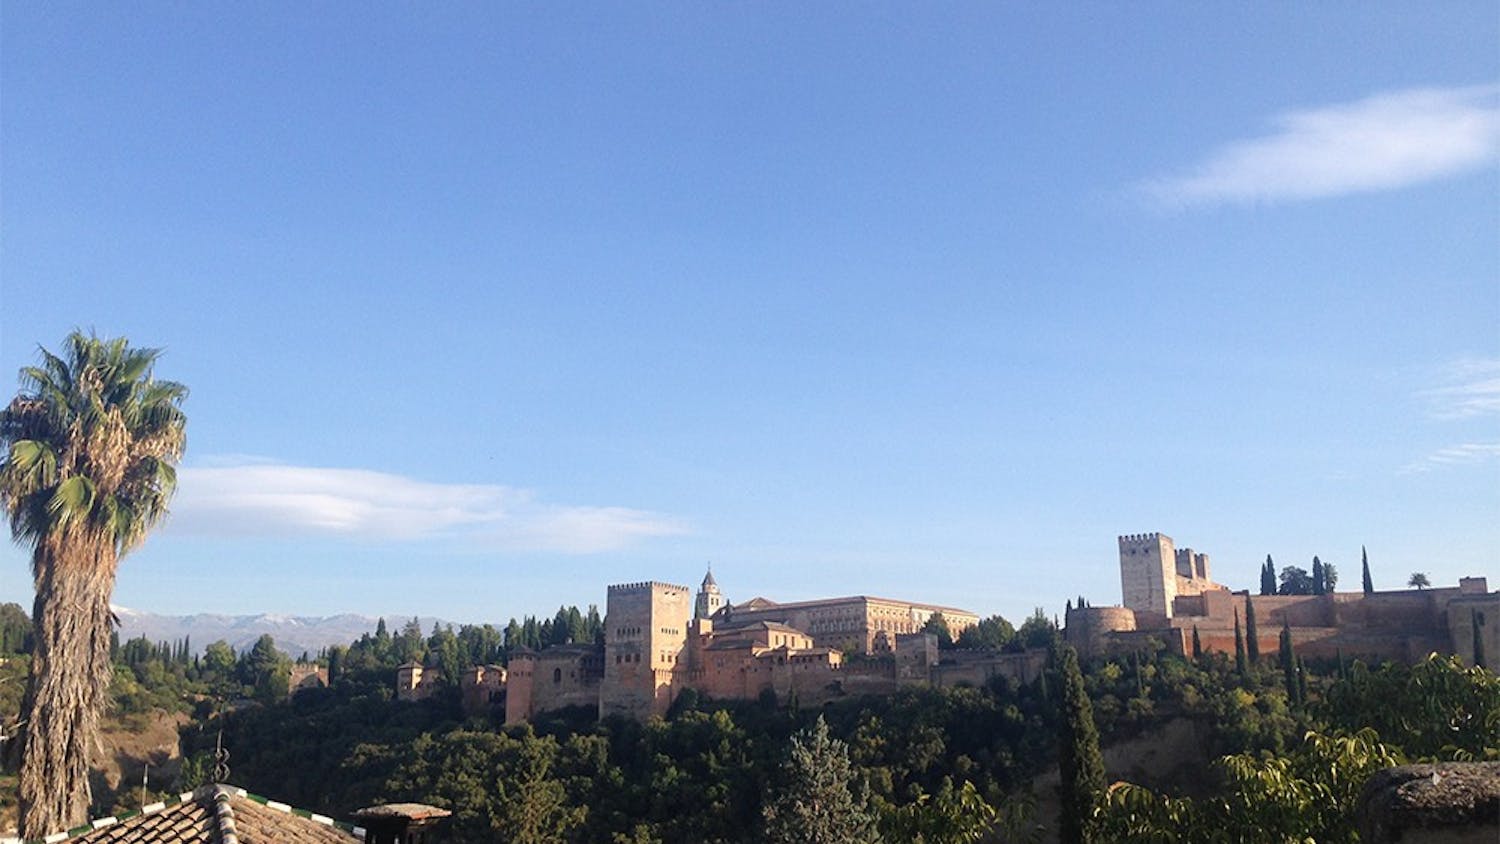 A view of the famous Alhambra in Granada, Spain. Columnist Lauren Saxe recommends spending time and money on experiences while studying abroad, not material things.